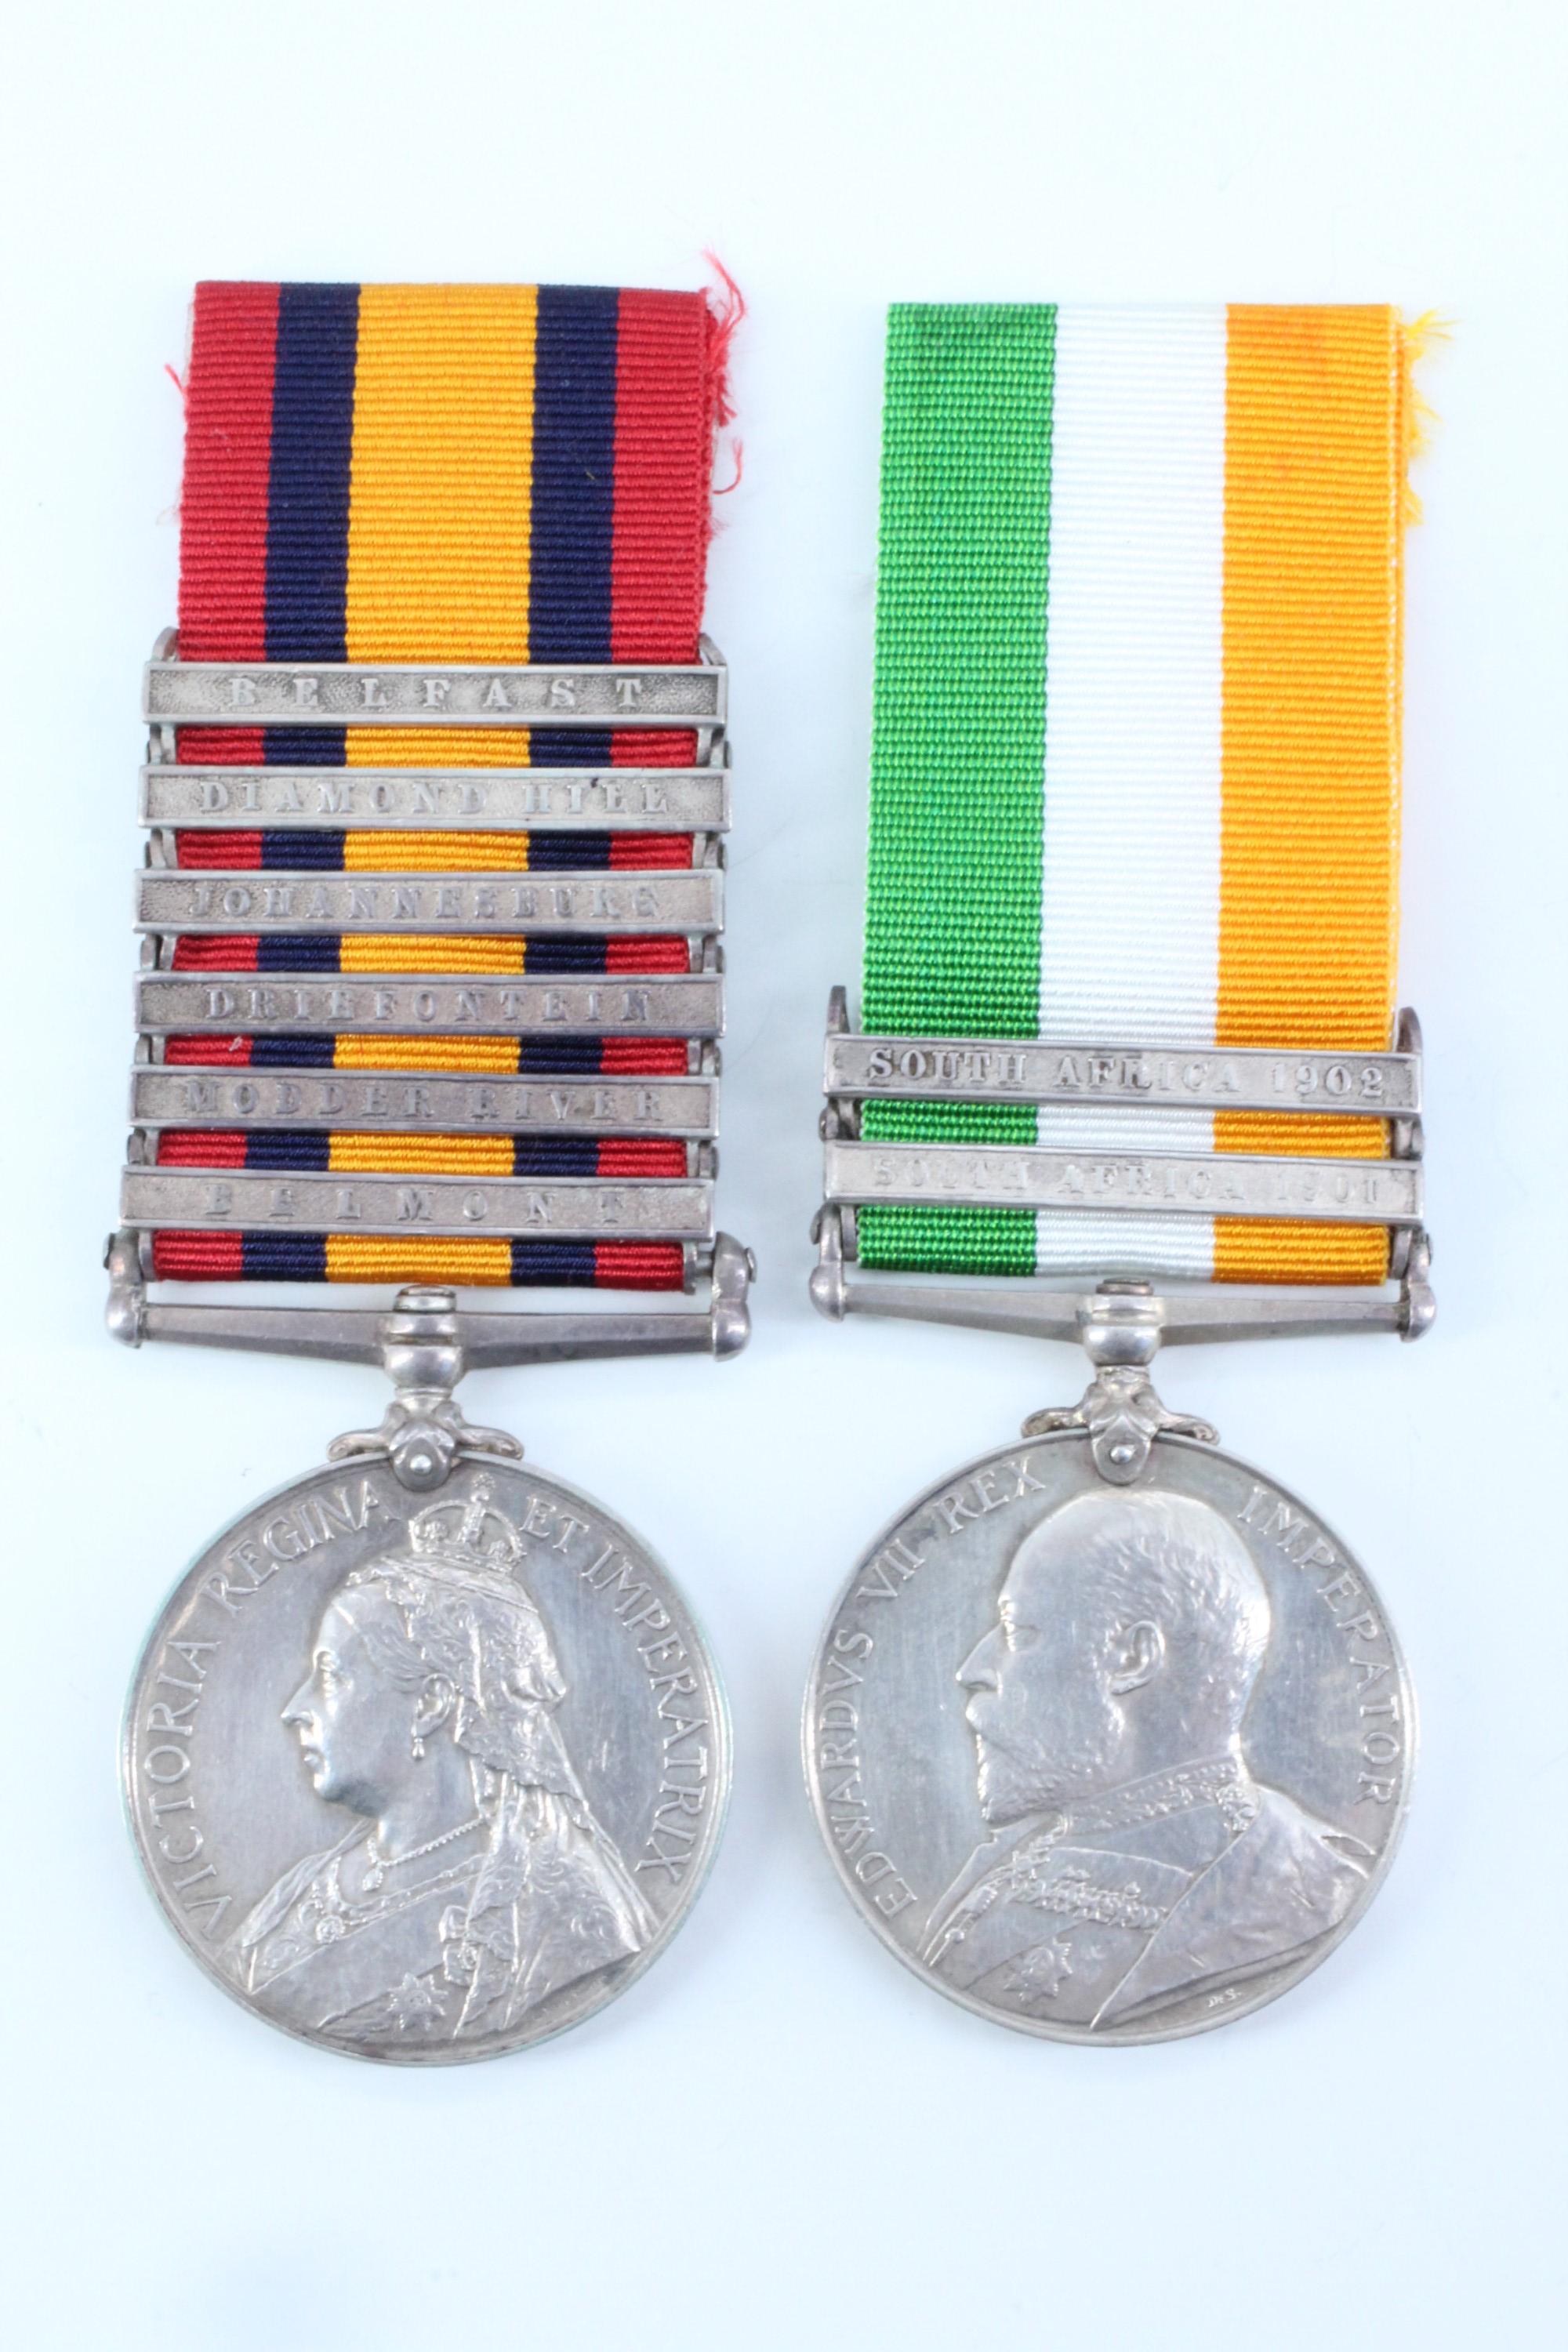 A Queen's South Africa Medal with six clasps, together with a King's South Africa Medal impressed to